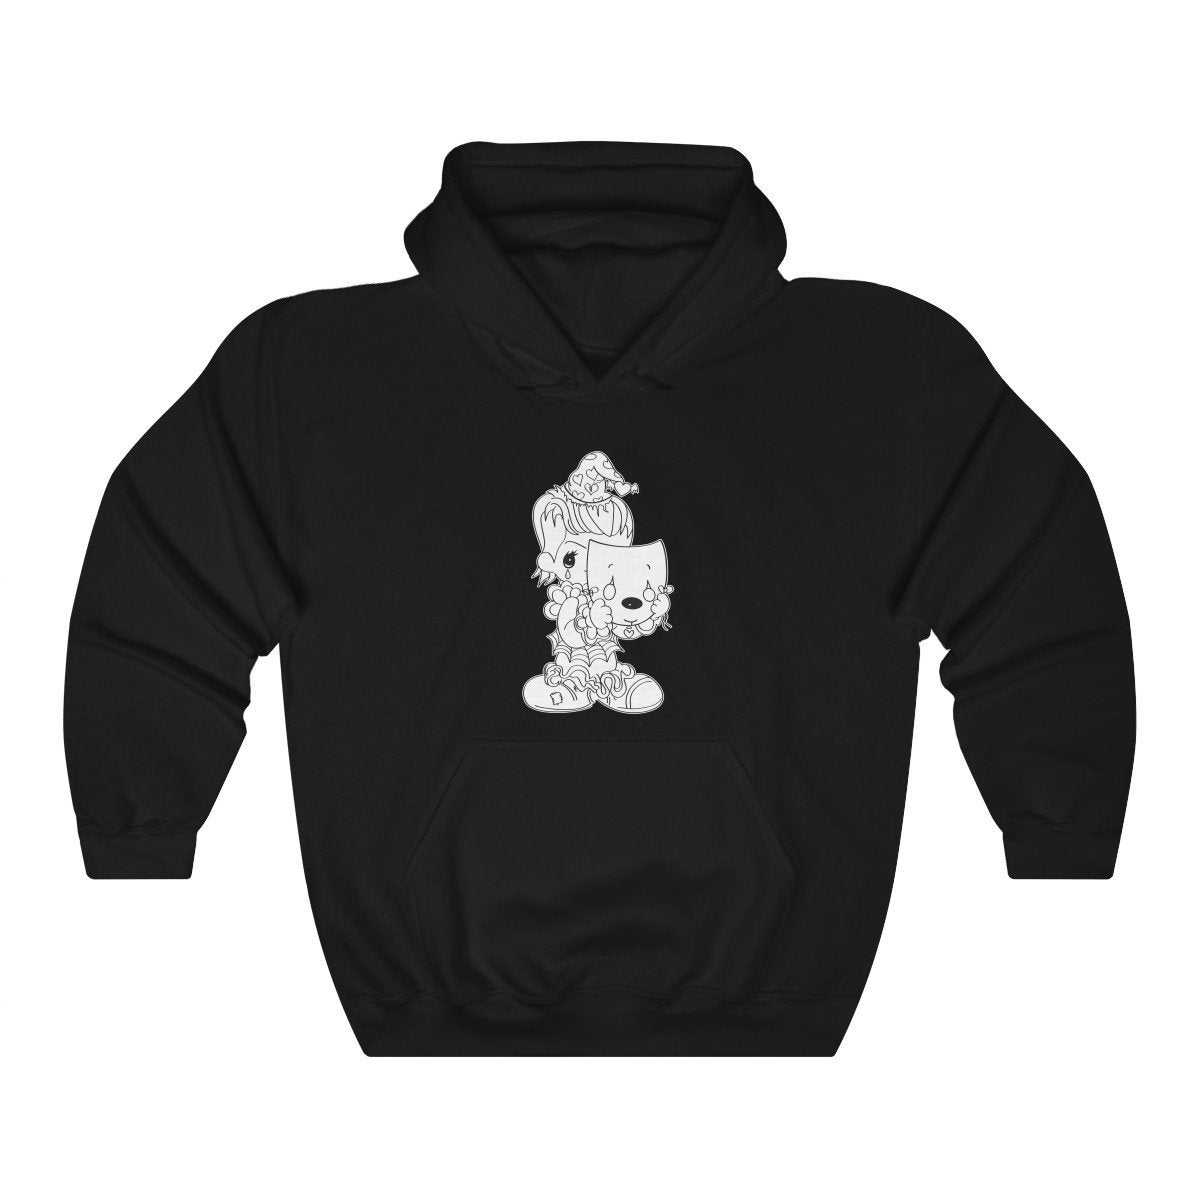 Hoodie Archives - Page 6 of 141 - newgraphictees.com